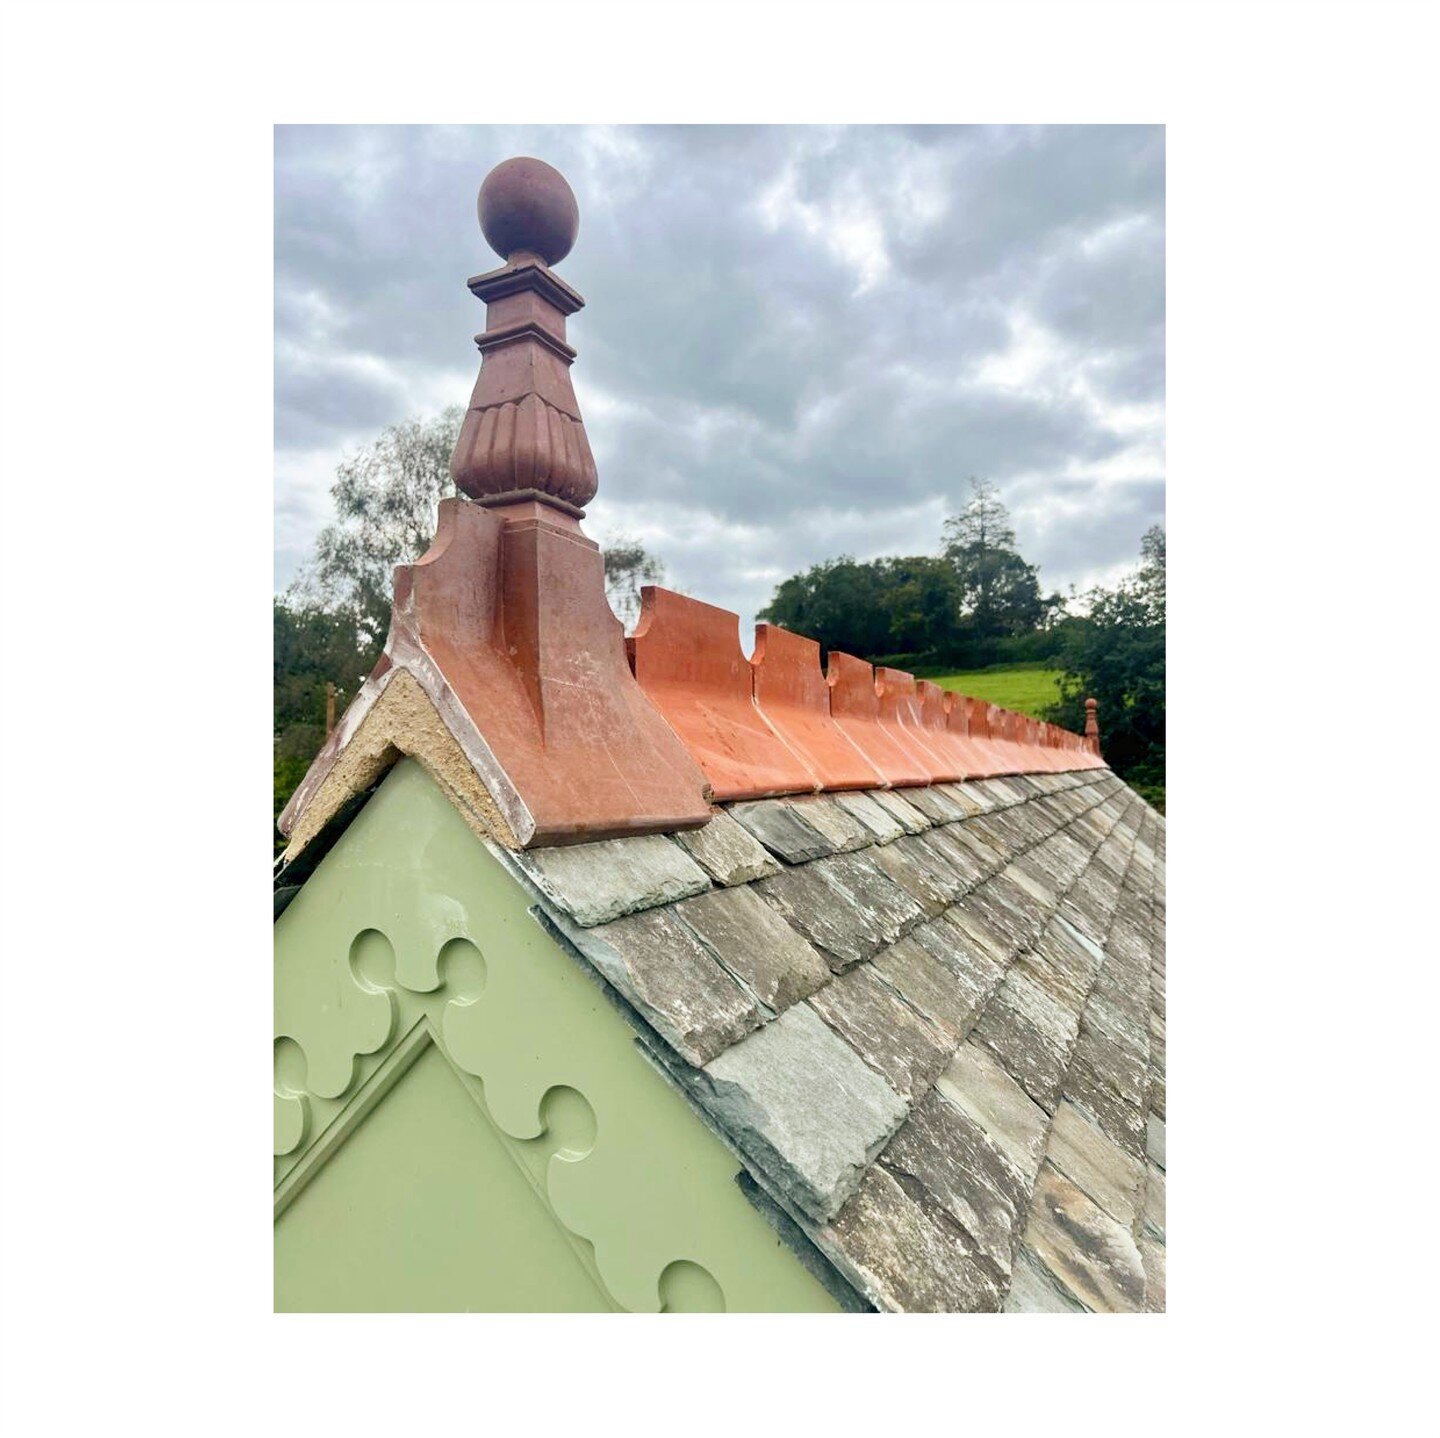 M O H I L L - L O D G E
P R O G R E S S
1 of 2

At Mohill Lodge the original highly decorative terracotta finials and ridge tiles have been restored and are back in place!

The terracotta-red looks fantastic combined with the sea-green slates and sof